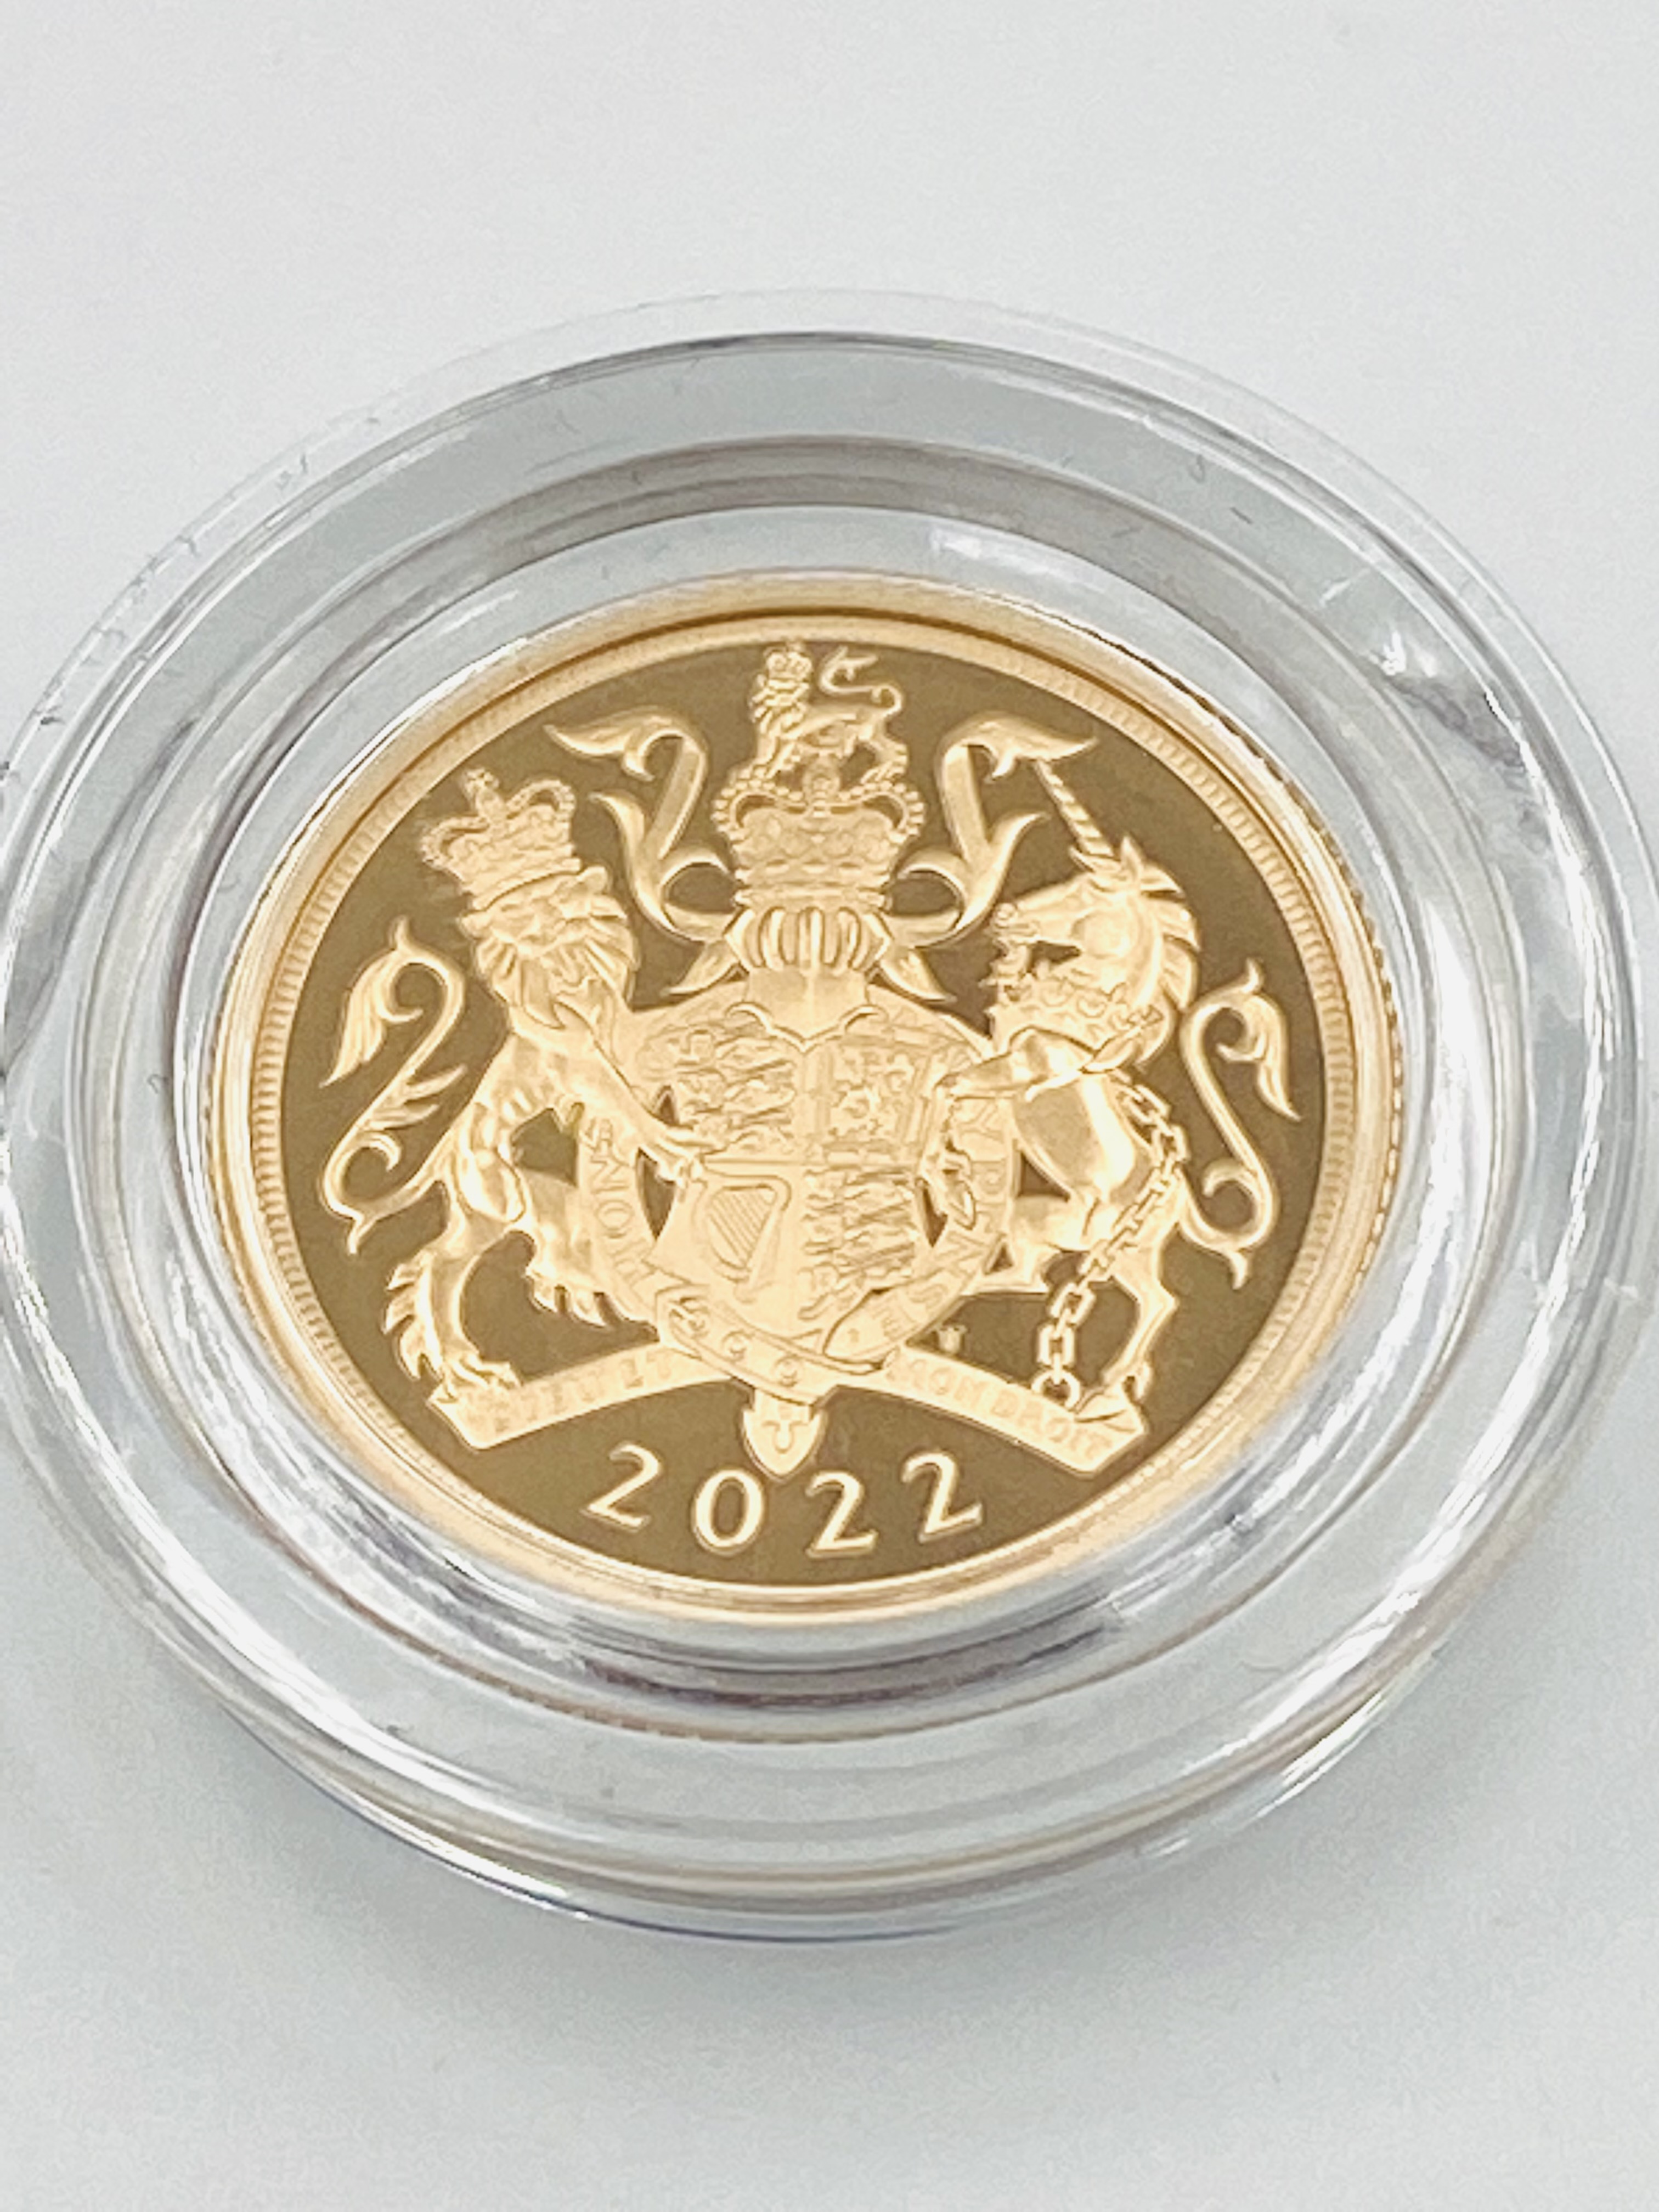 Royal Mint 2021 limited edition 22ct gold proof sovereign - Image 4 of 5